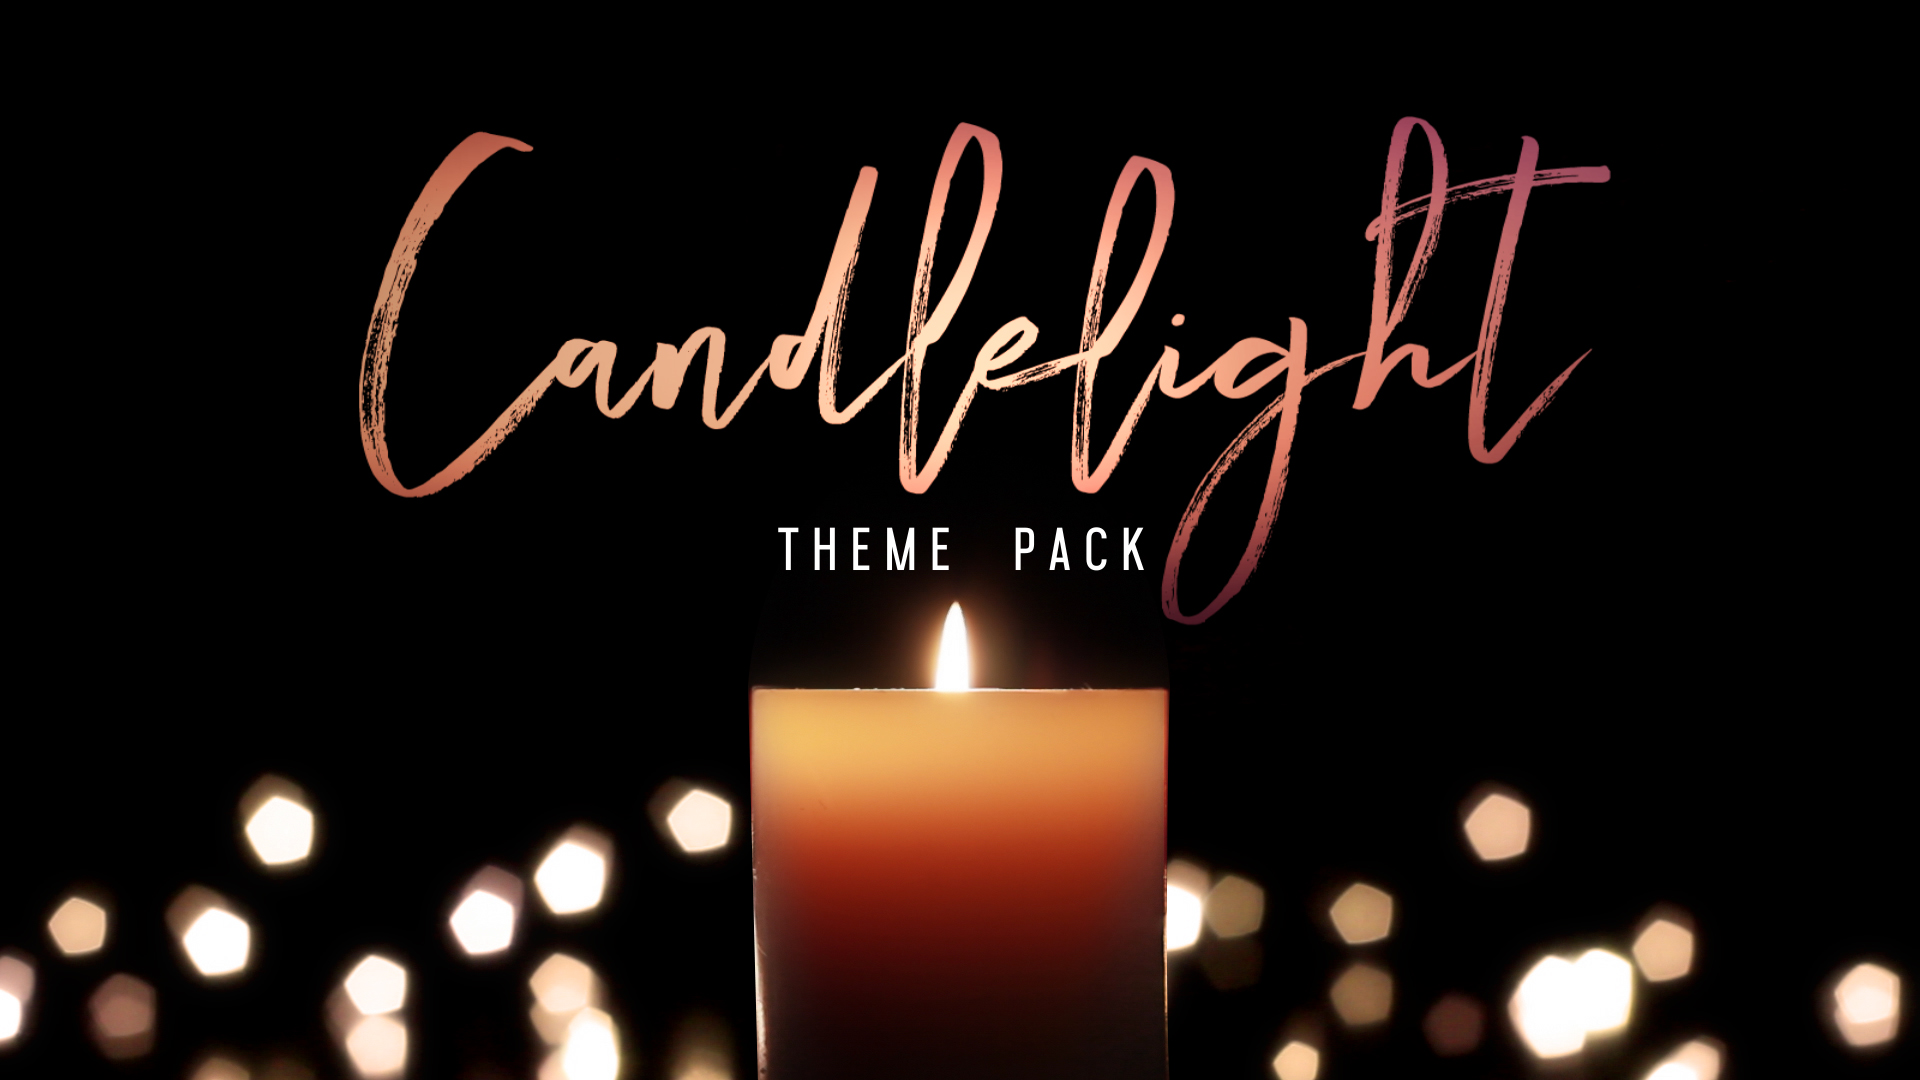 Candlelight Theme Pack